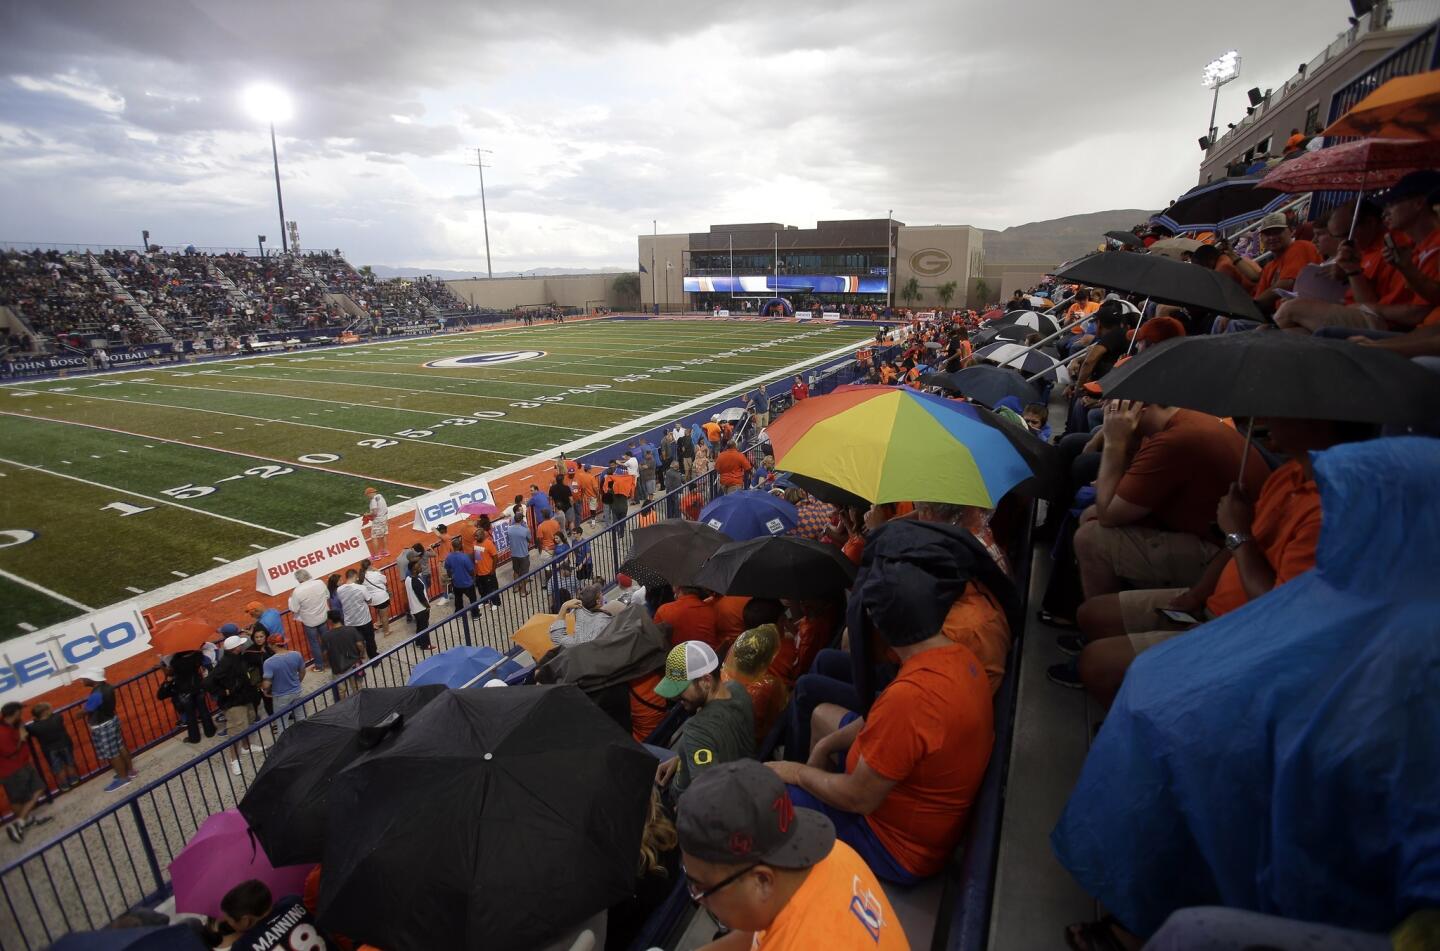 The start of the high school football game between No. 2-ranked Bishop Gorman and top-ranked St. John Bosco was delayed nearly an hour Friday night because of lightning.